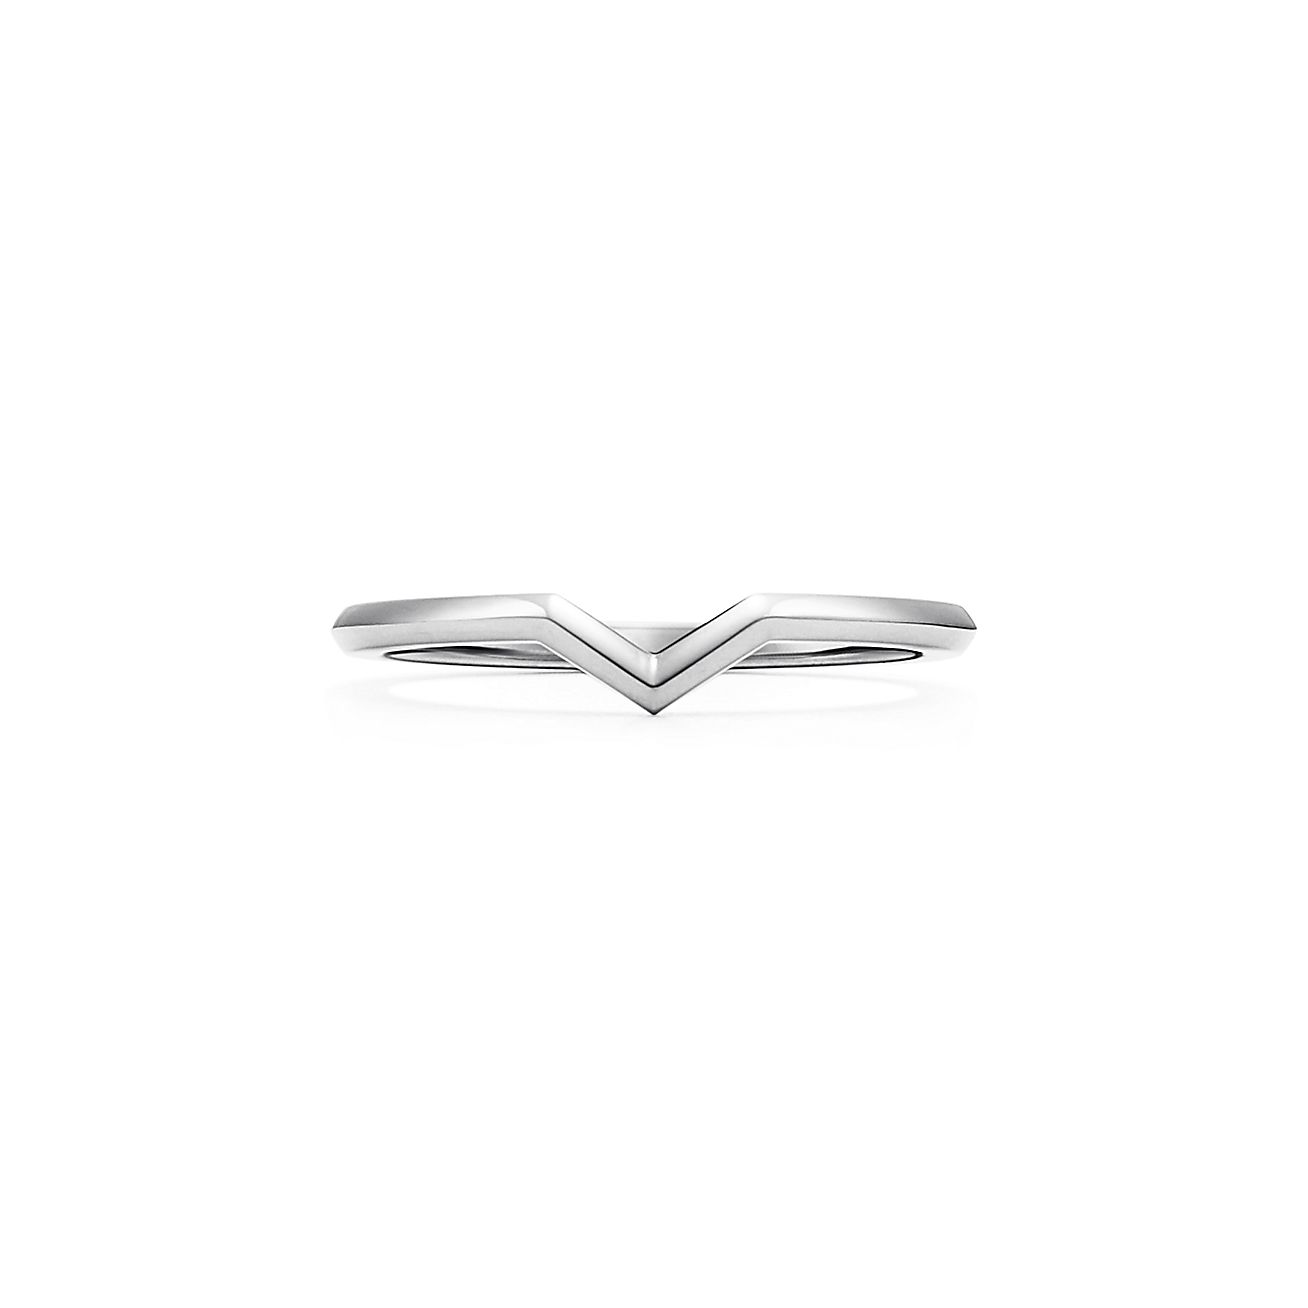 Chemicaliën George Eliot krant The Tiffany® Setting V band ring in platinum, 1.7 mm wide. | Tiffany & Co.